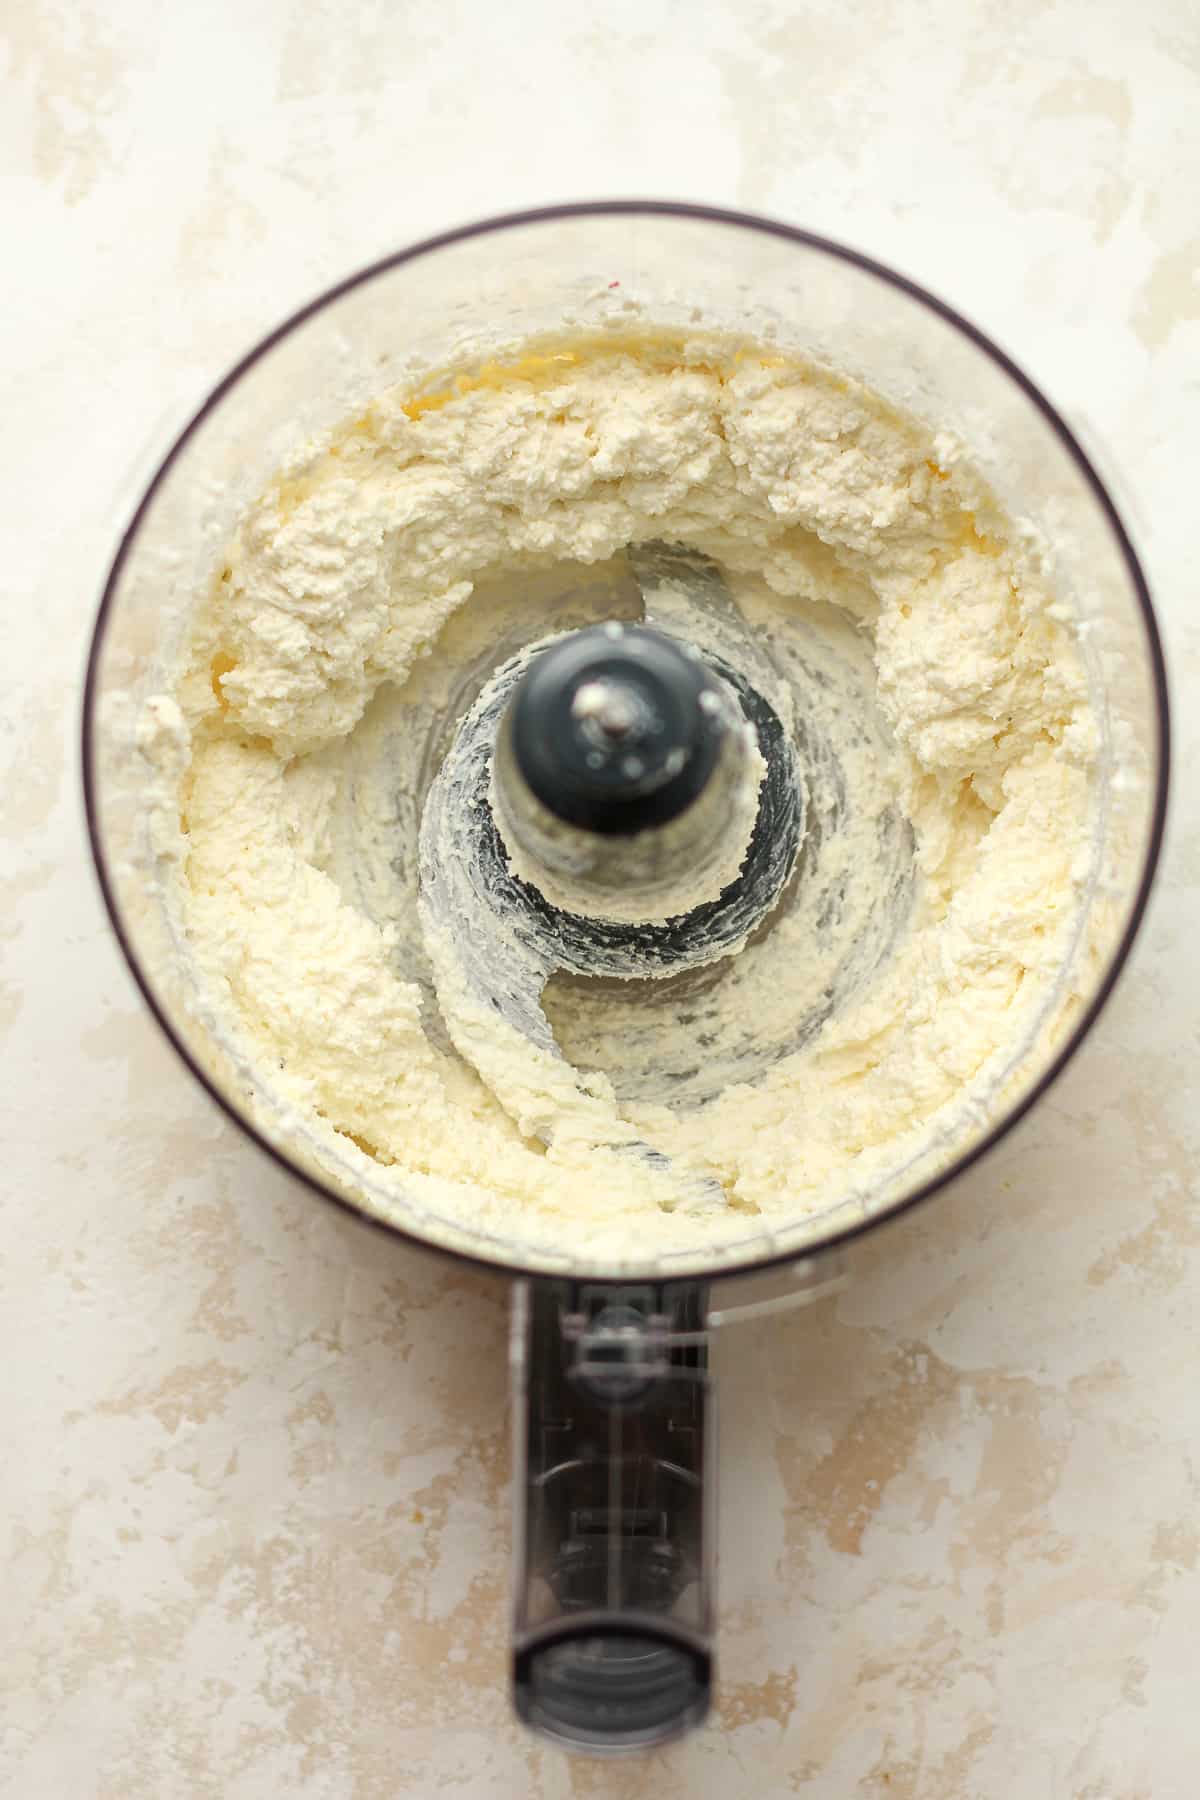 The food processor with whipped feta and cream cheese.